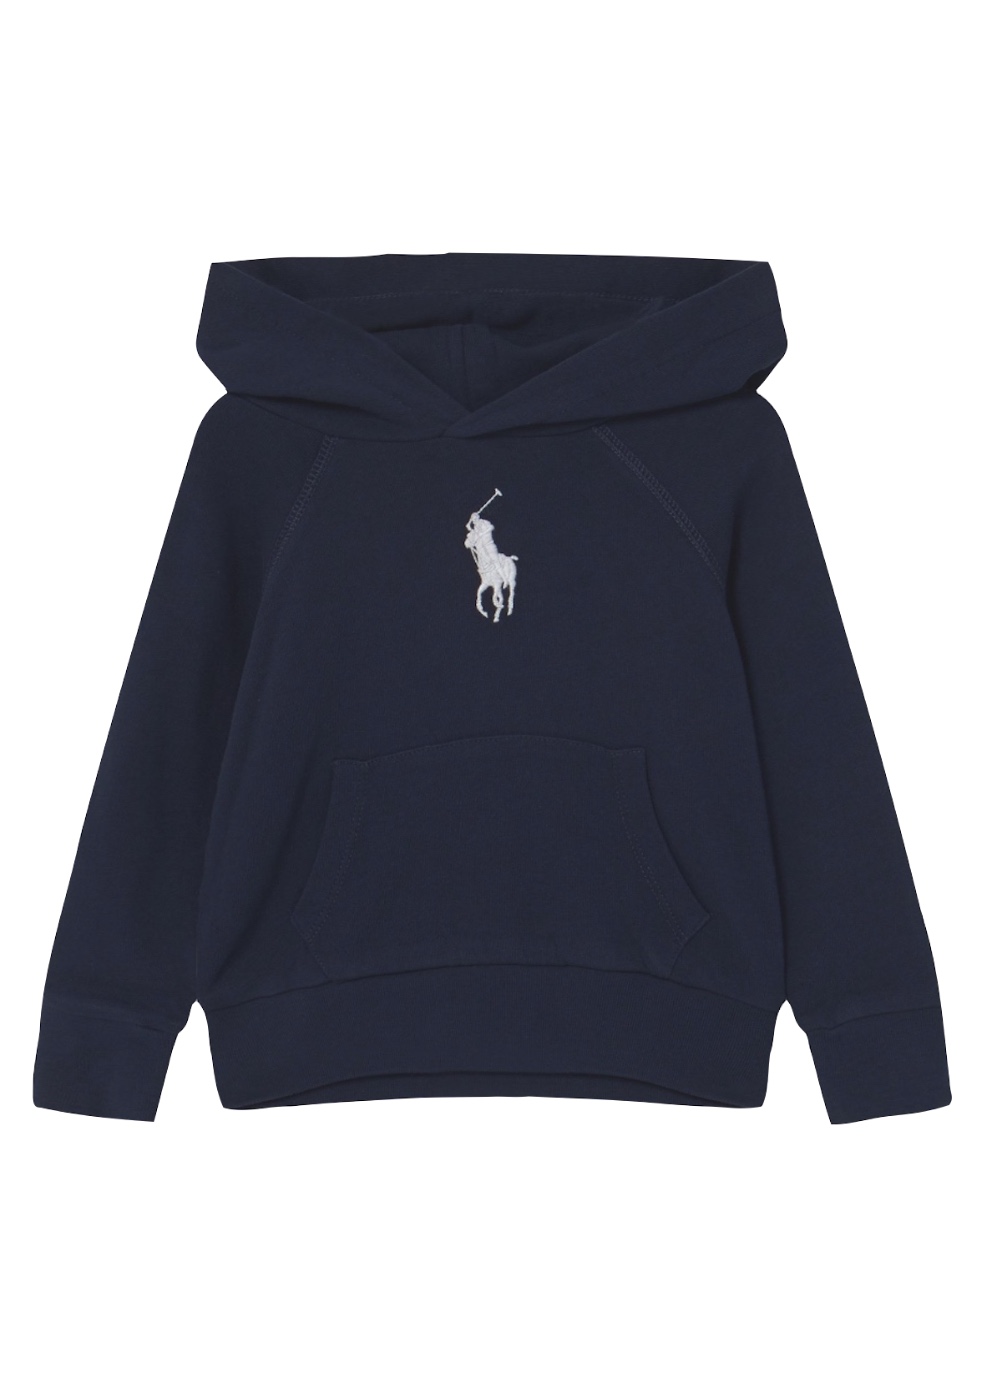 Featured image for “POLO RALPH LAUREN FELPA”